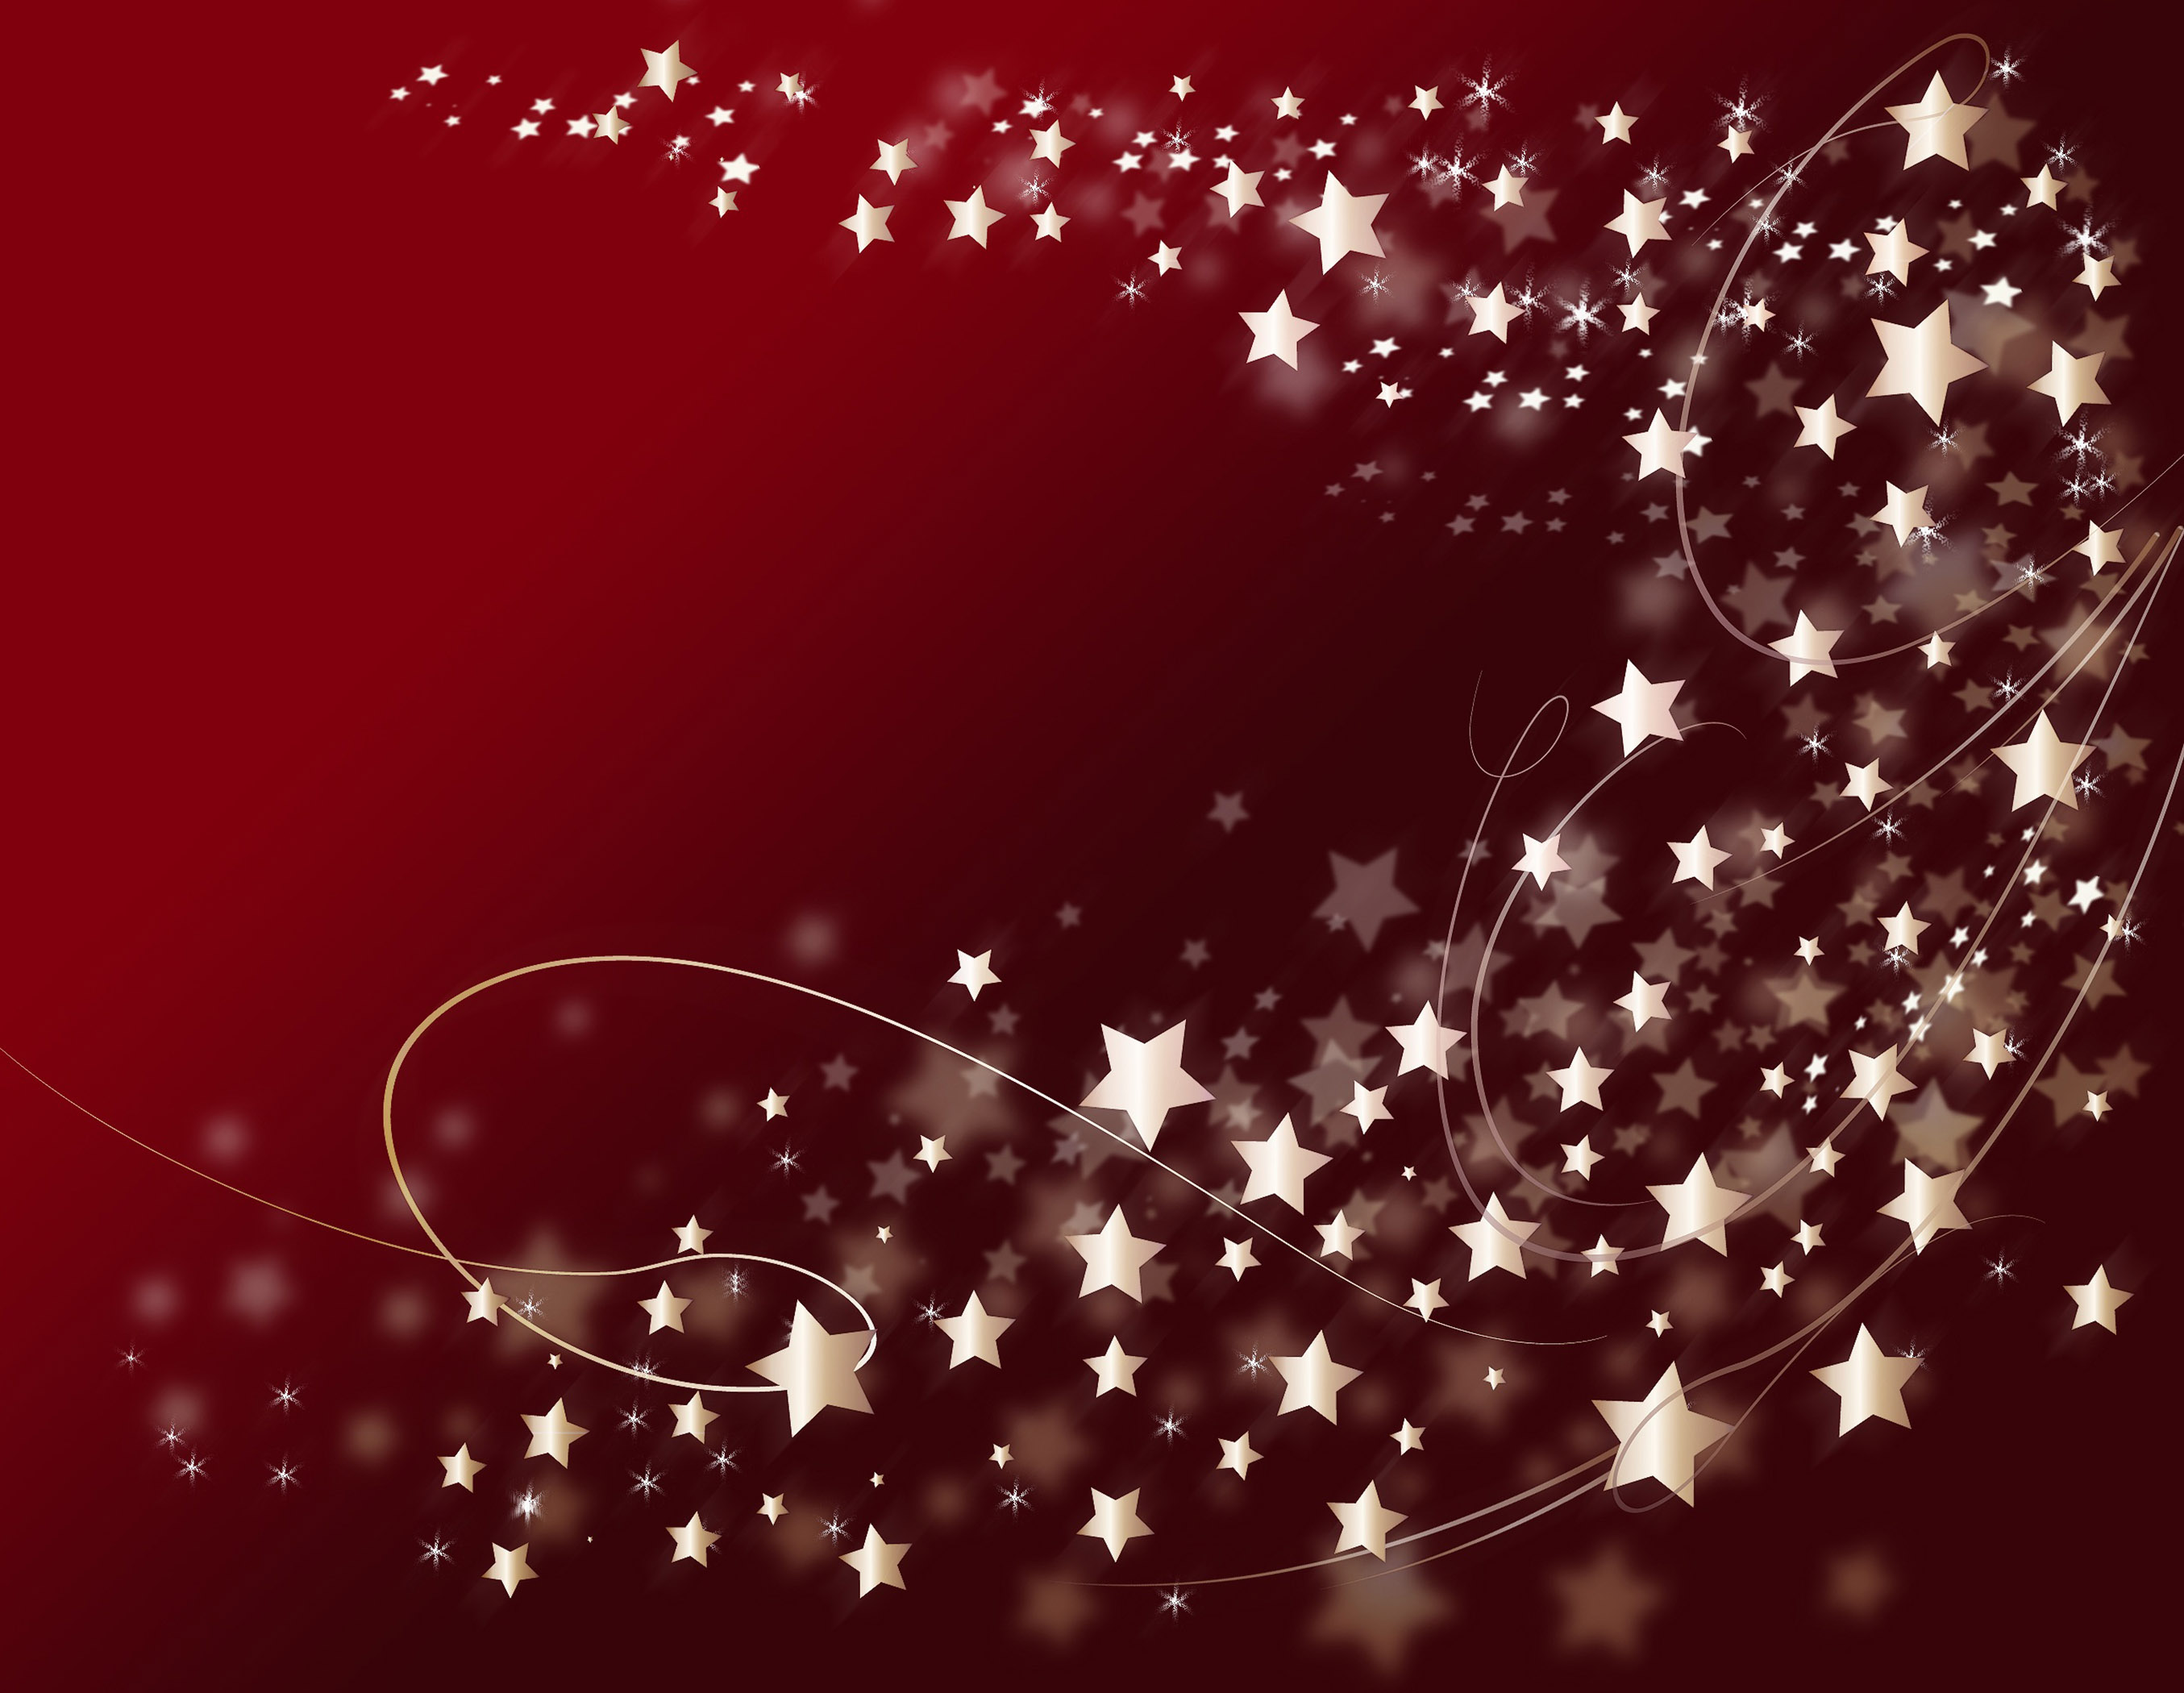  Stars at Xmas Background Images Cards or Christmas Wallpapers